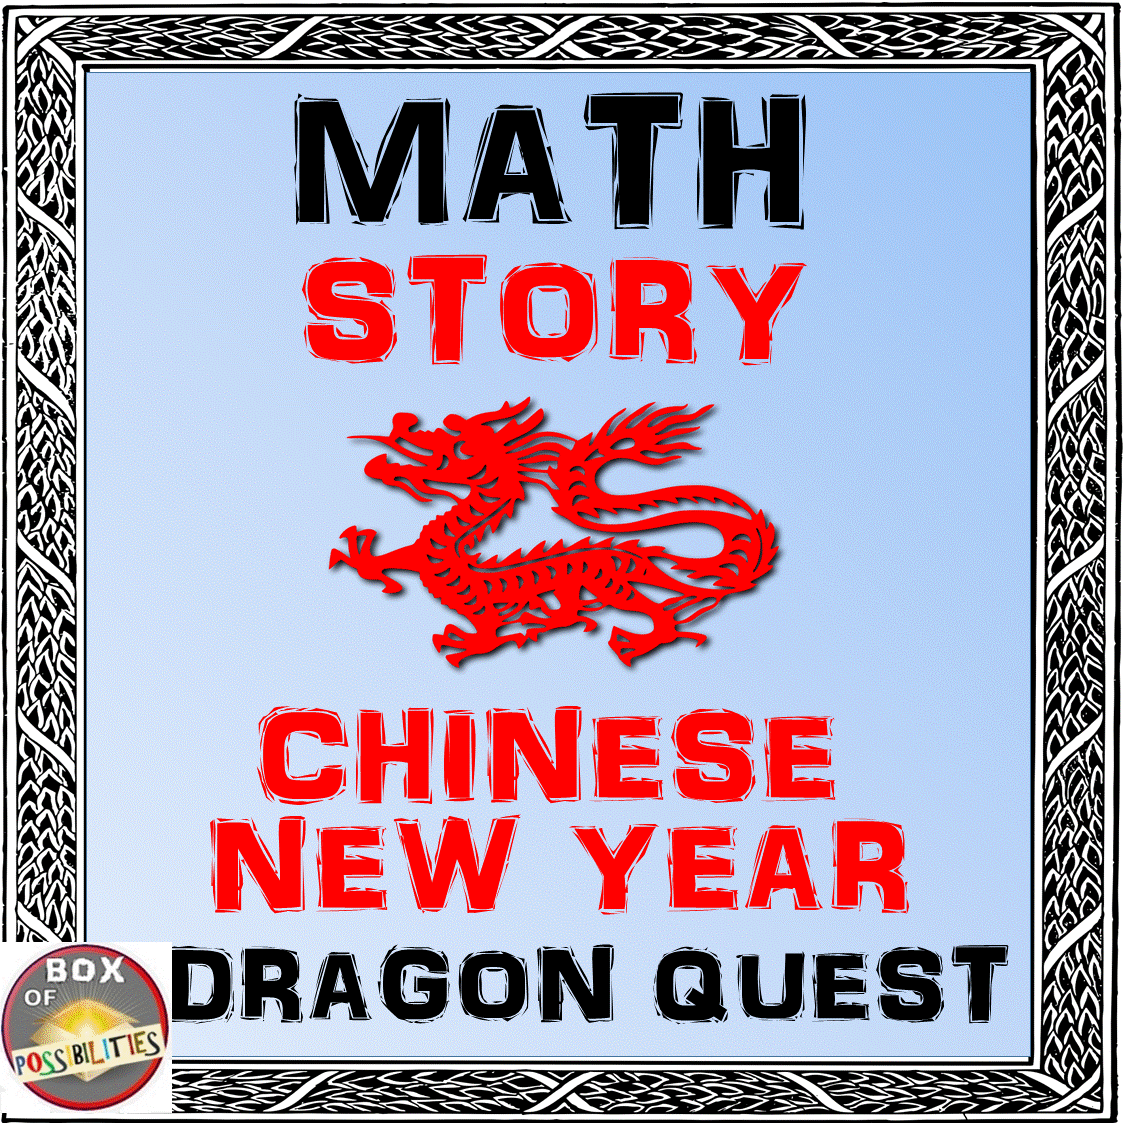 Need a fun Chinese New Year math activity for your students? This math activity/worksheet will engage your elementary or middle school students as they go on an adventure in ancient China using their math skills (multiplication, long addition, map skills, & algebra). Use this math mystery as a review or fun classroom activity. #math #ChineseNewYear #elementary #mathactivities #middleschool #mathactivity #grade5 #grade6 #CSI #China #worksheets #activities #multiplication #mathmystery